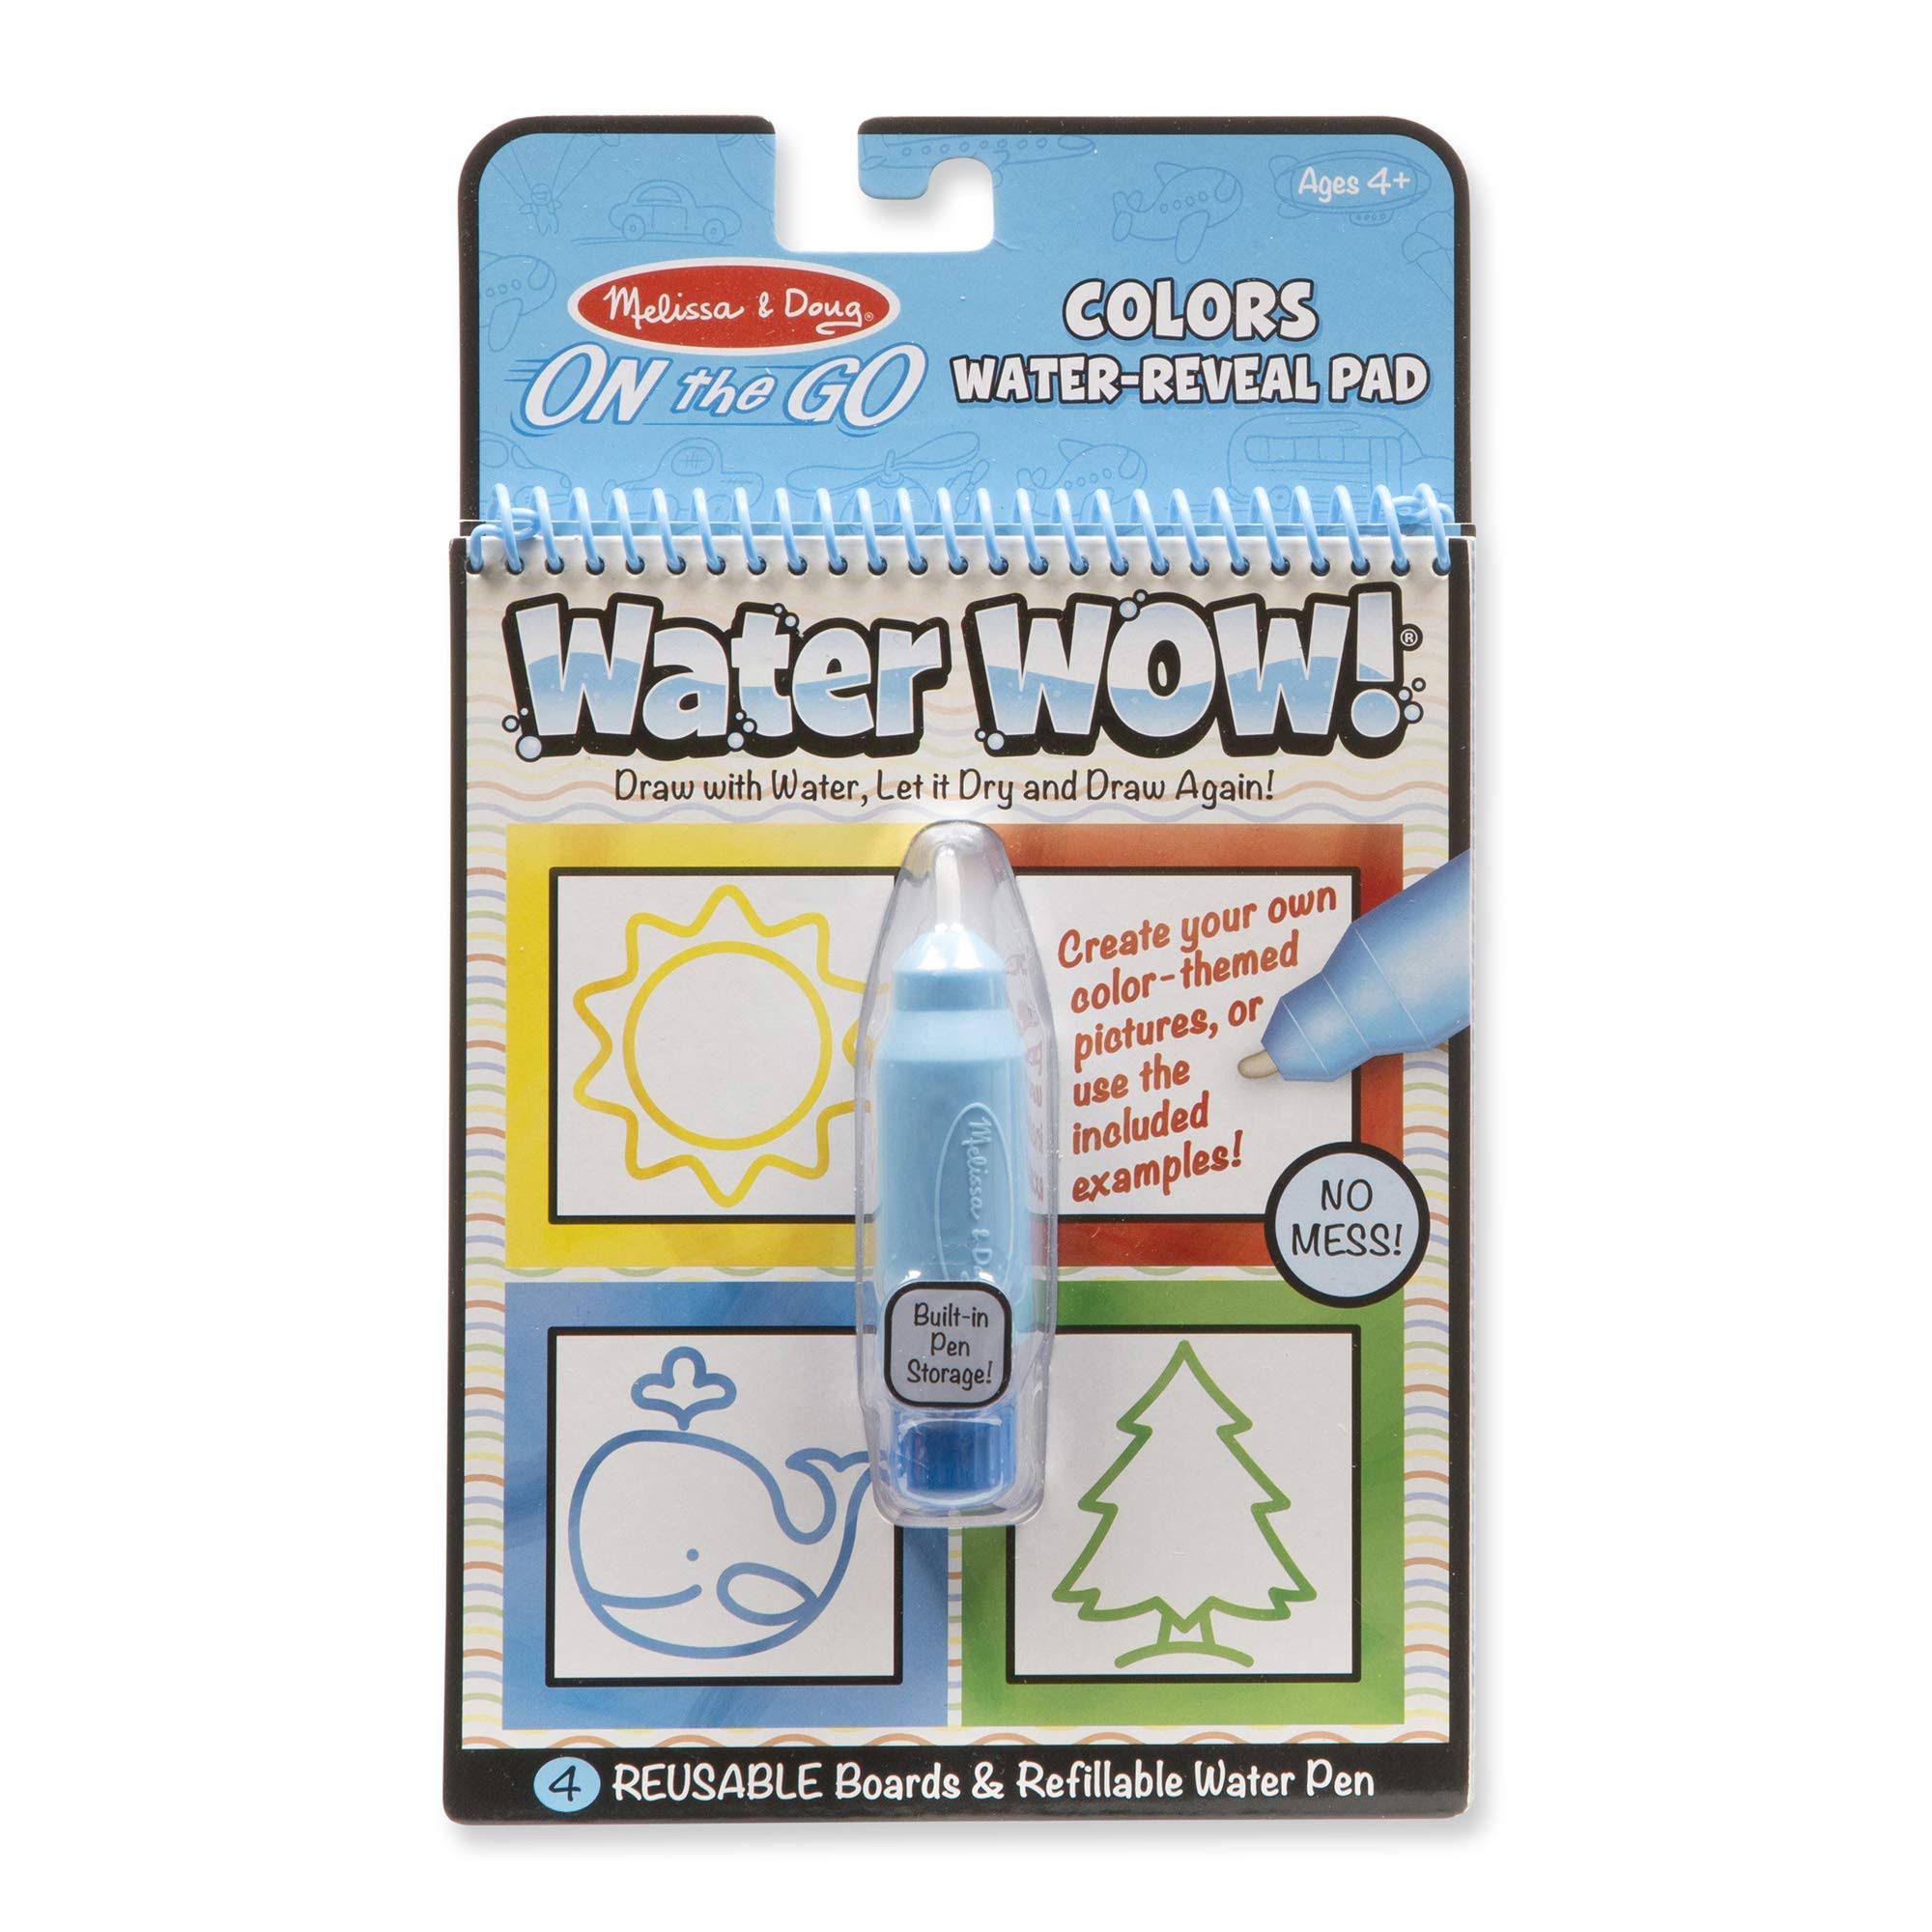 Melissa & Doug On the Go Water Wow! Reusable Water-Reveal Activity Pad